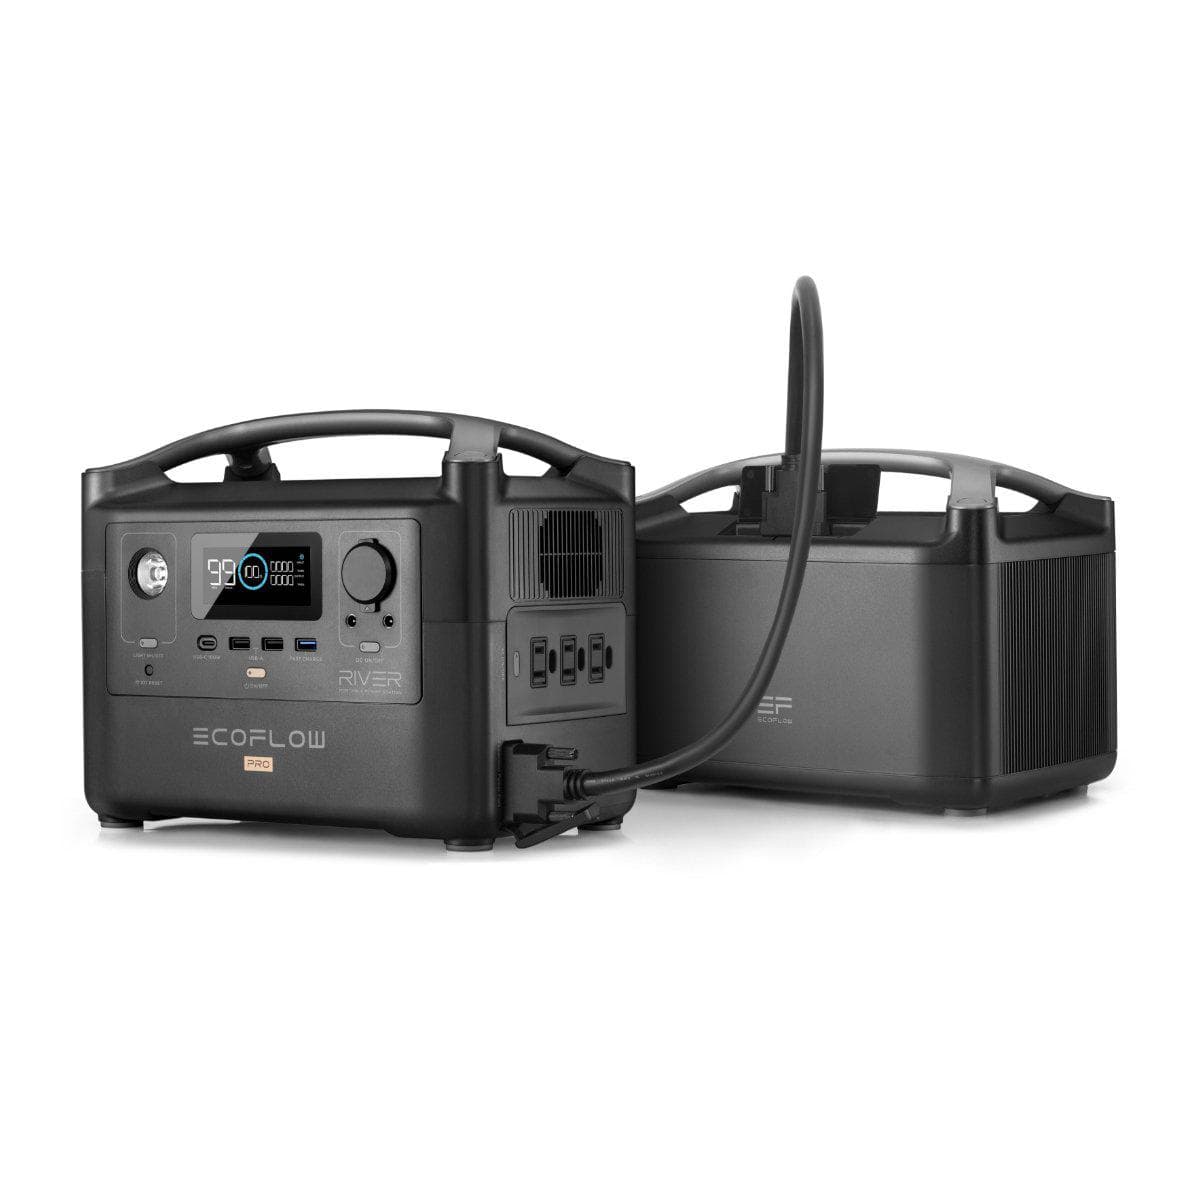 EcoFlow RIVER Pro + RIVER Pro Extra Battery-Offroad Scout